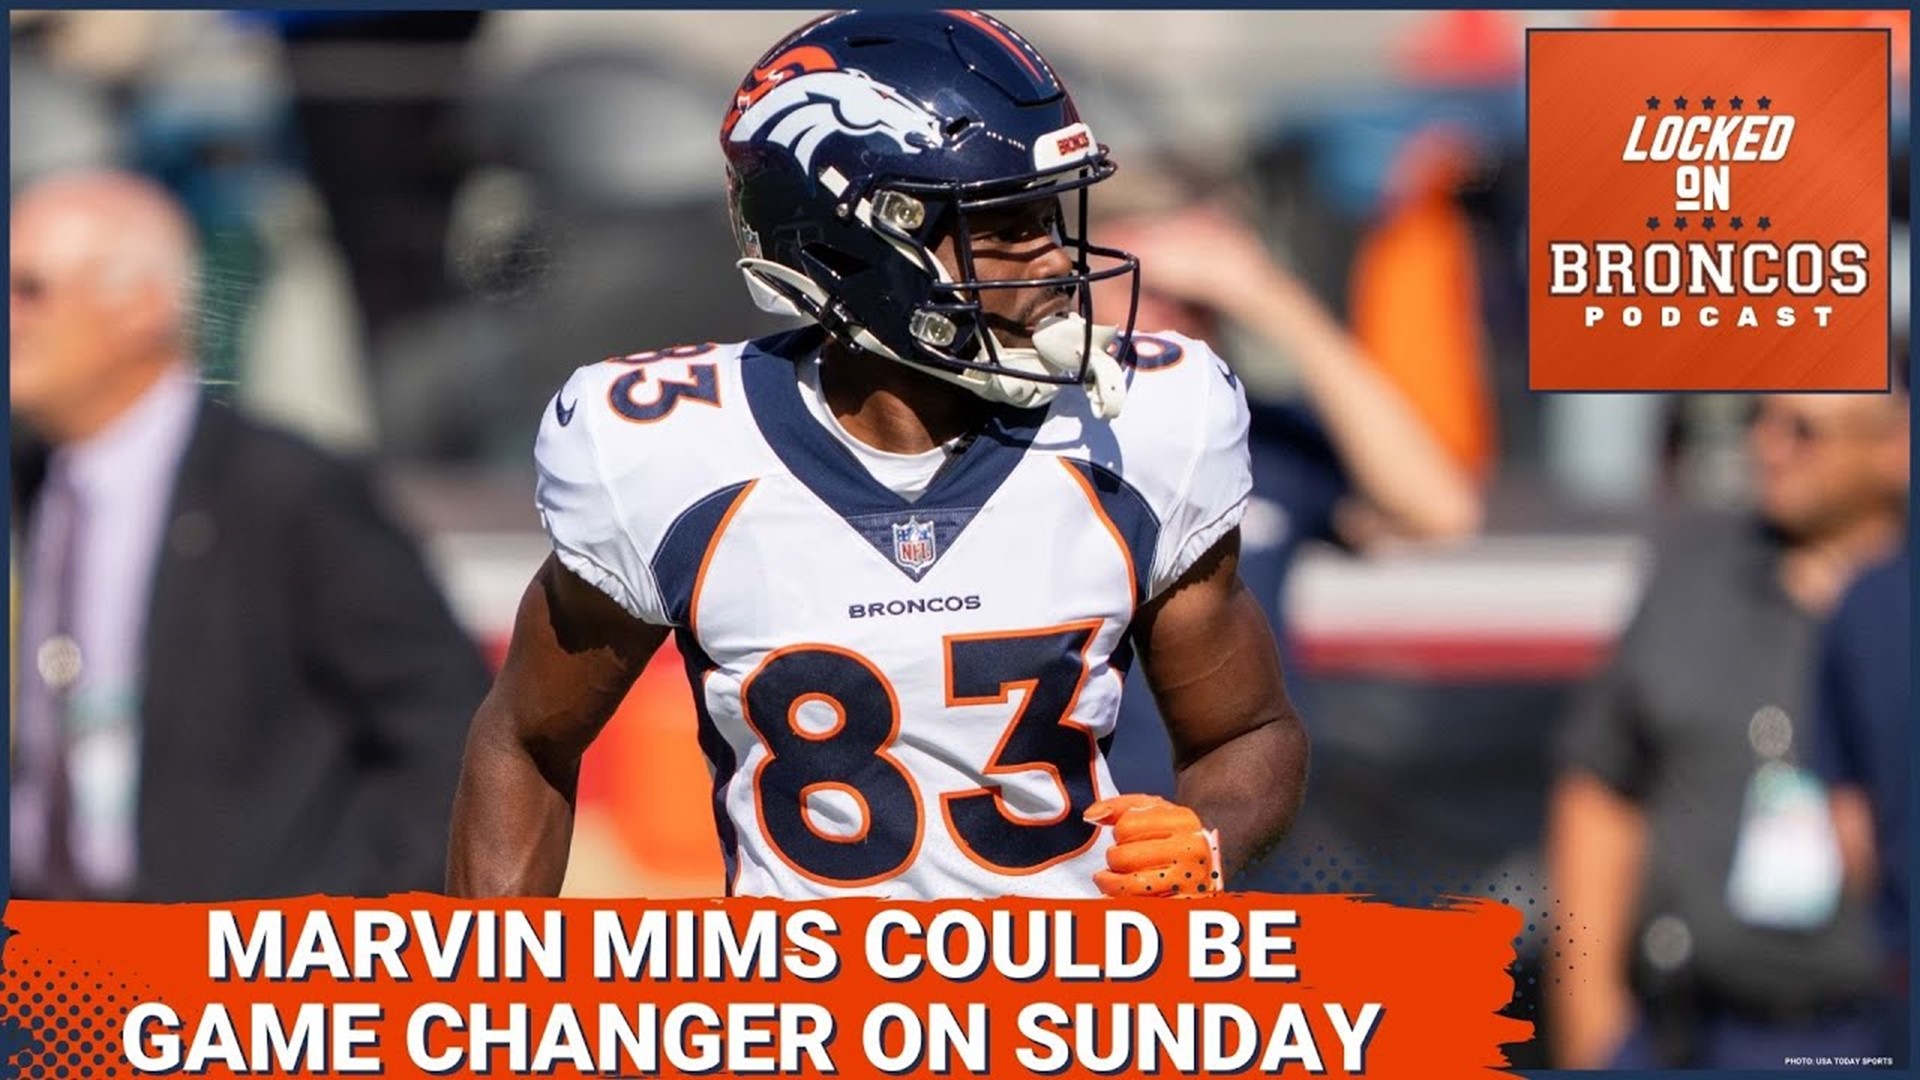 Denver Broncos rookie wide receiver Marvin Mims could be a game-changer vs. the Washington Commanders on Sunday.